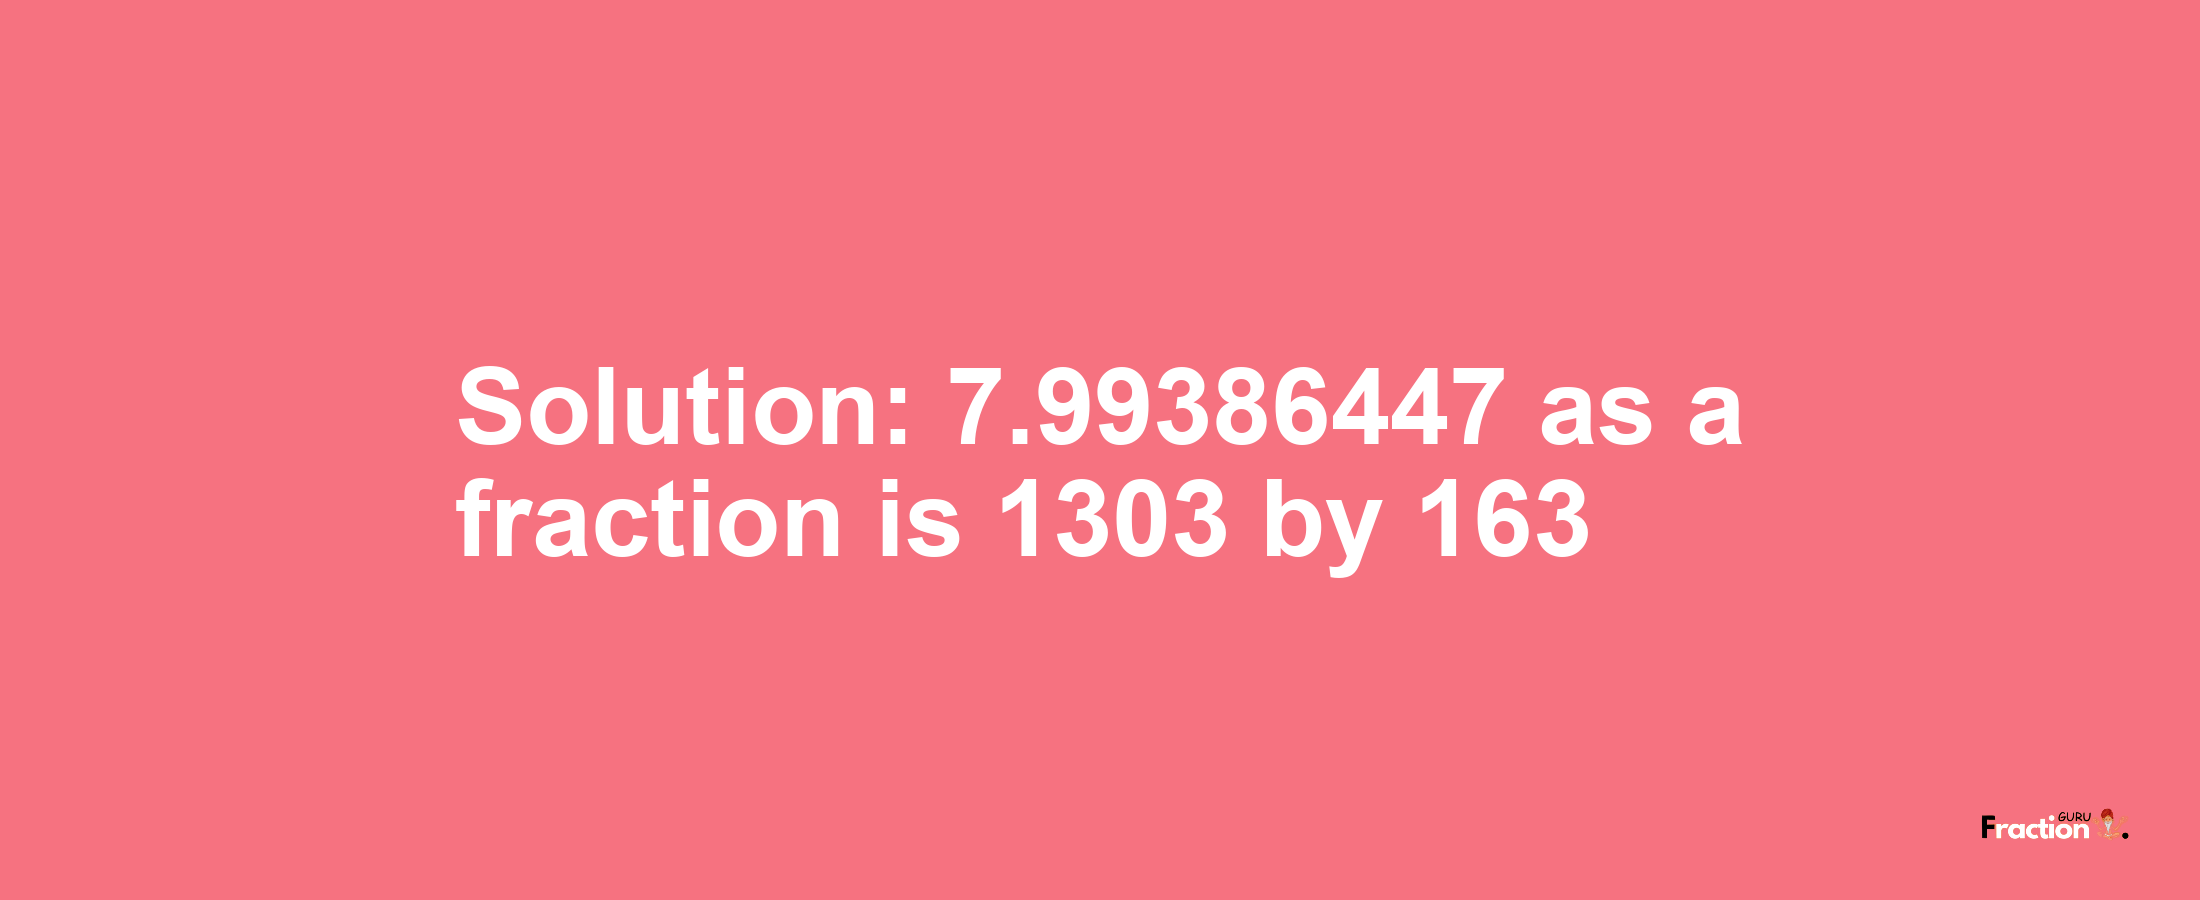 Solution:7.99386447 as a fraction is 1303/163